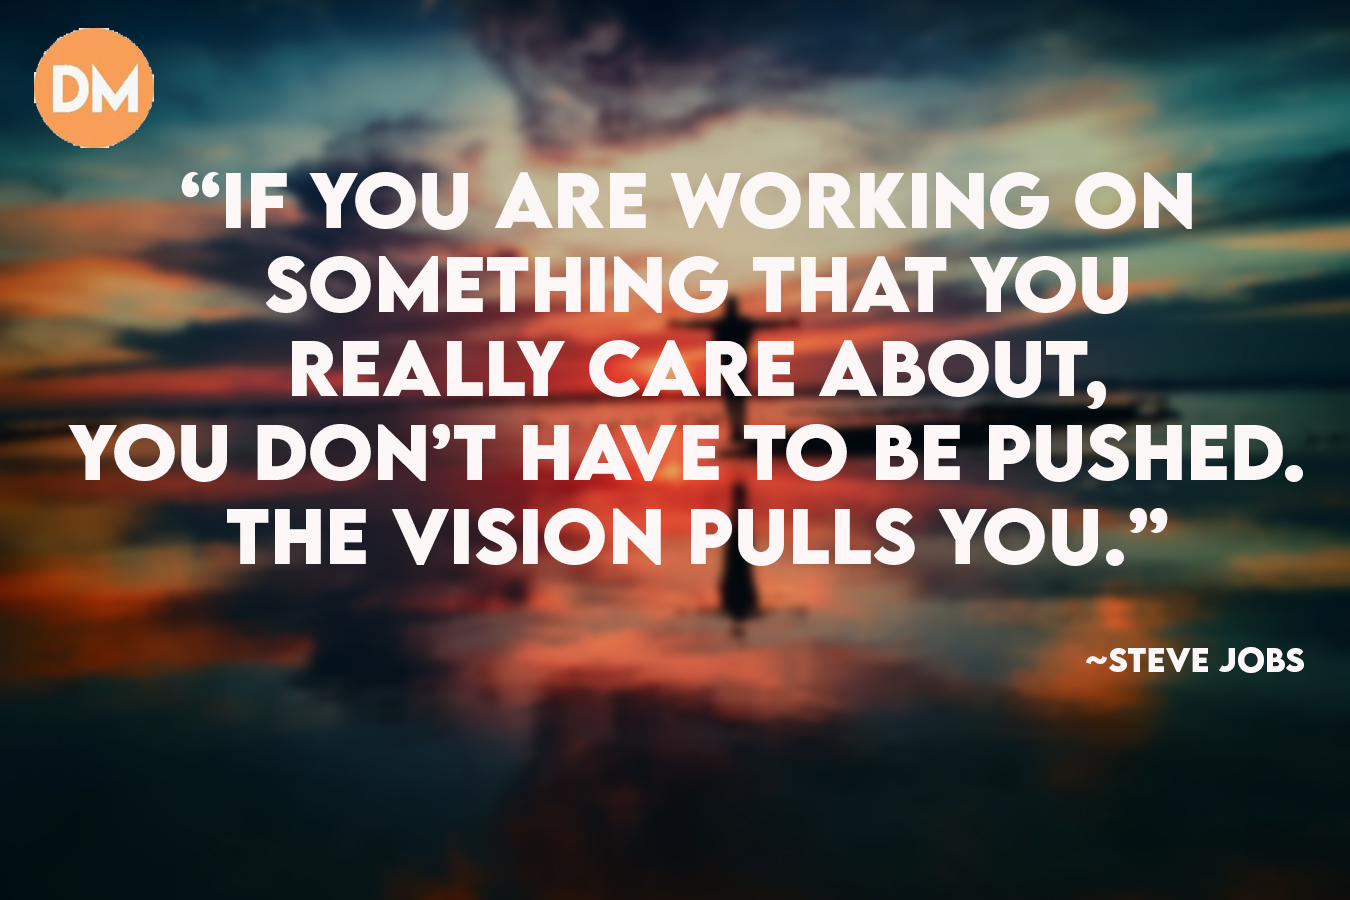 If you are working on something that you really care about, you don’t have to be pushed. The vision pulls you.